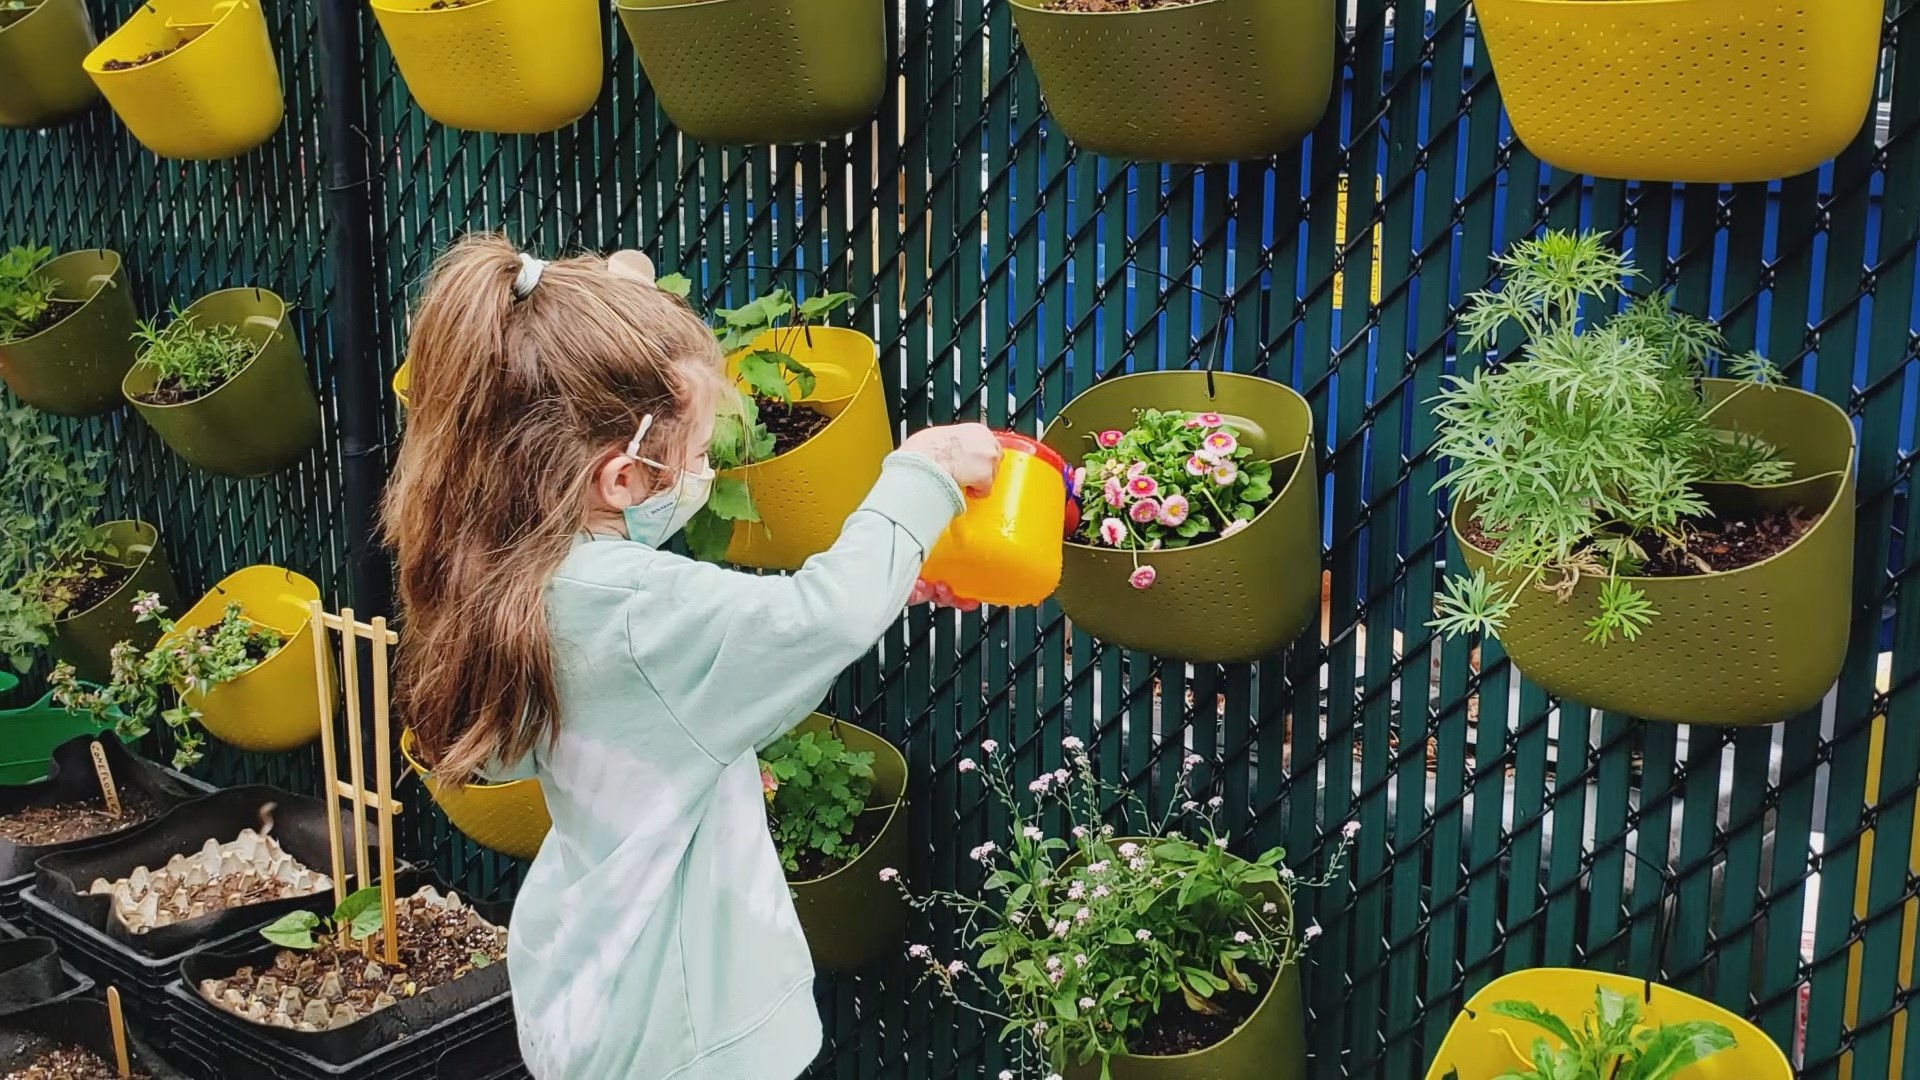 These students are using their green thumbs for good.